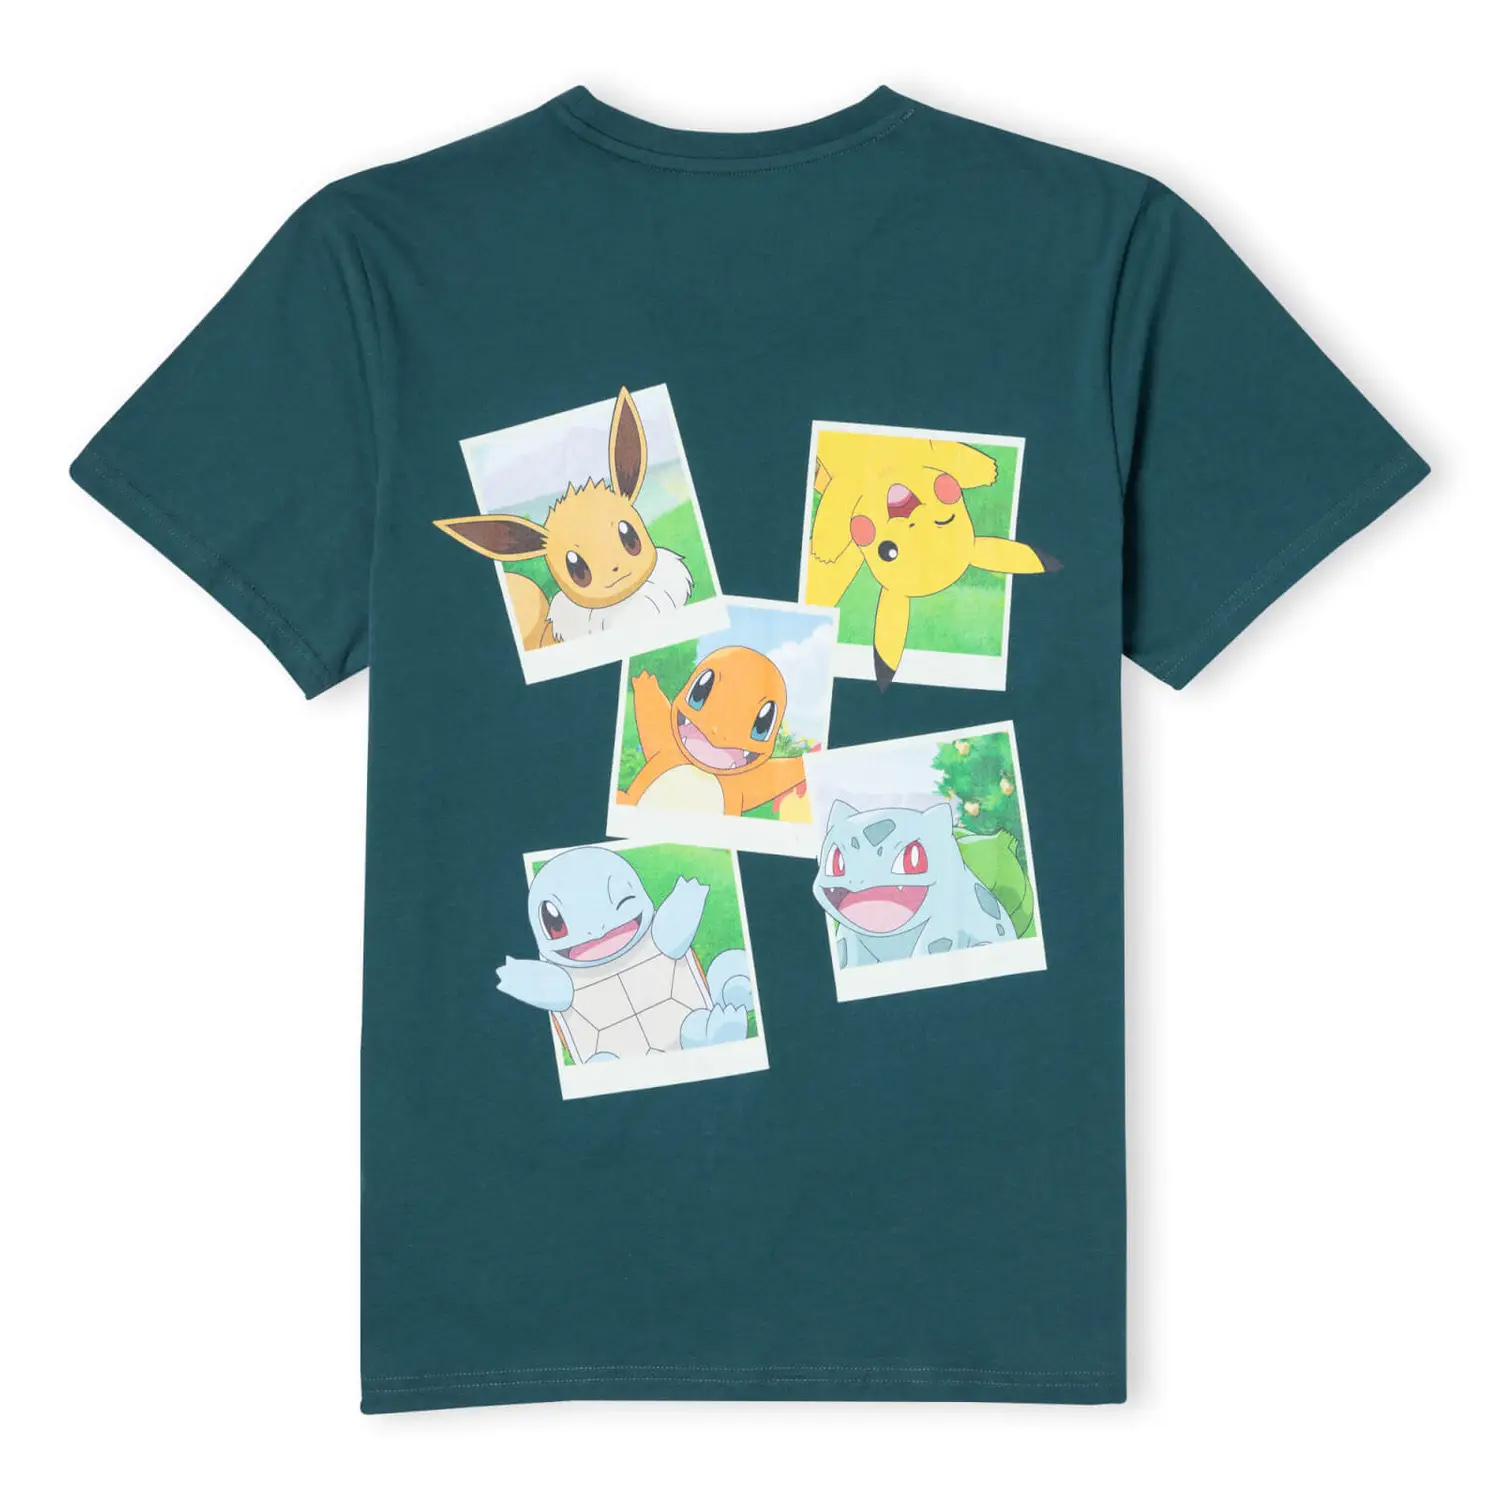 Kontur Intens Enkelhed Zavvi releases new set of t-shirts to celebrate New Pokémon Snap's launch  in the UK - Nintendo Wire